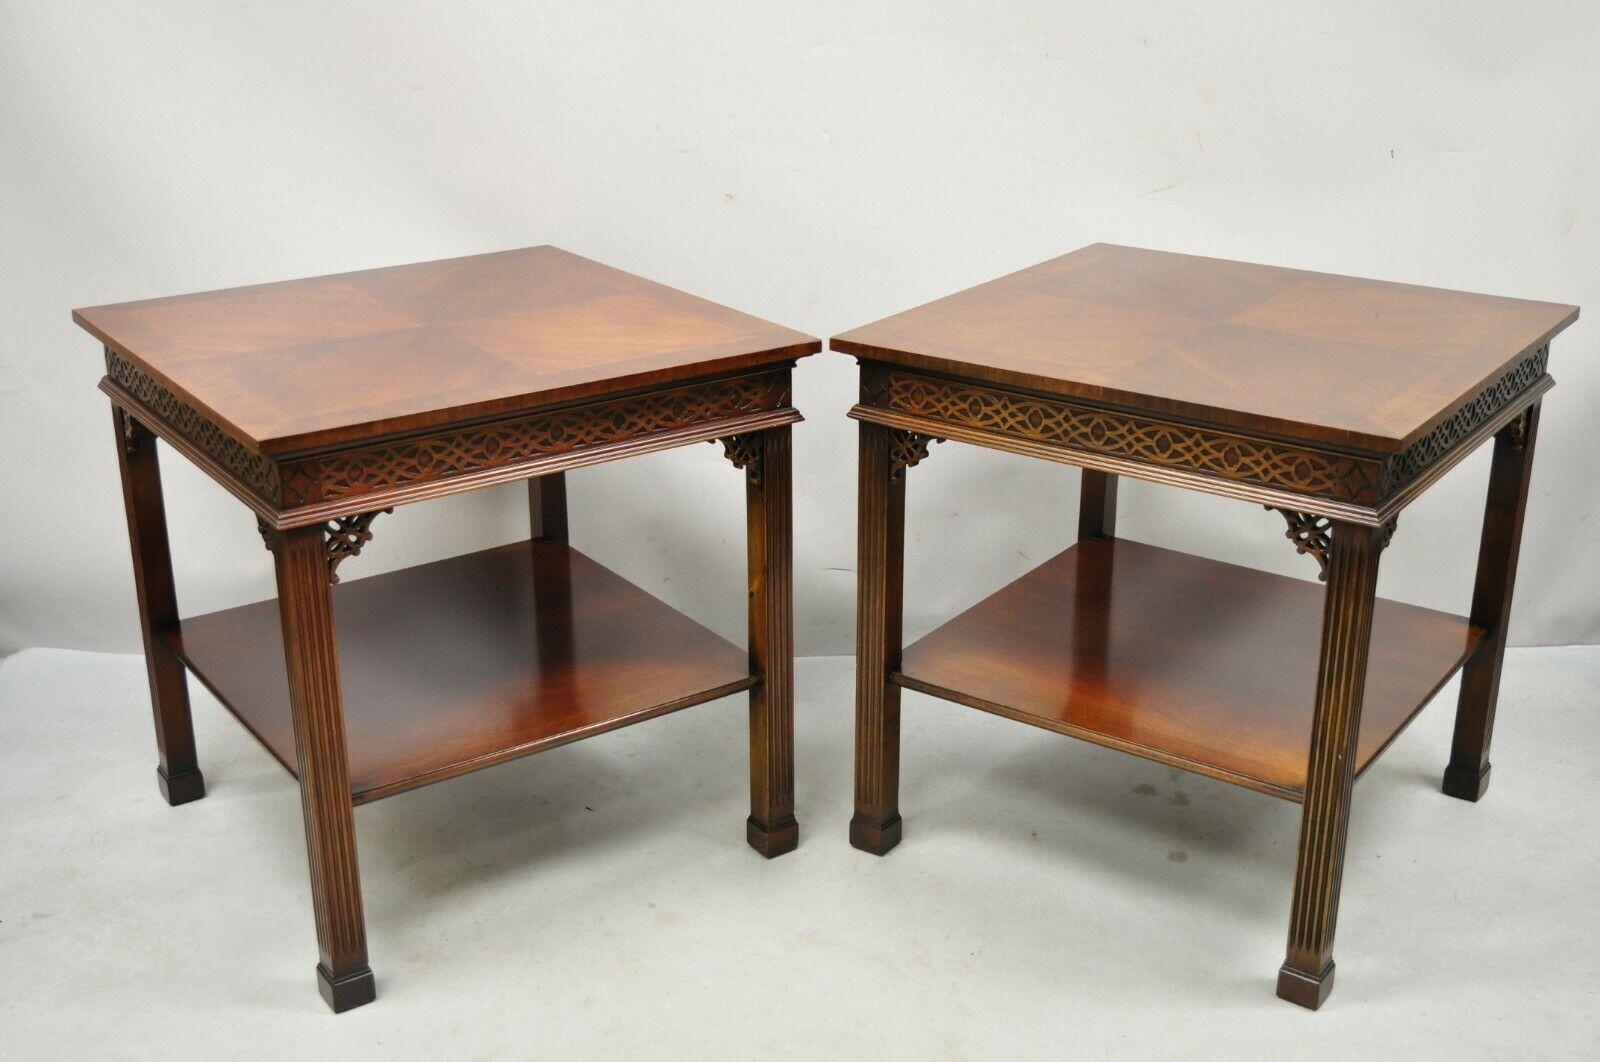 Wellington hall mahogany Chinese Chippendale fretwork end tables - a pair. Item features 2 tiers, banded tops, beautiful wood grain, nicely carved details, original label, quality American craftsmanship. Circa mid 20th century. Measurements: 26